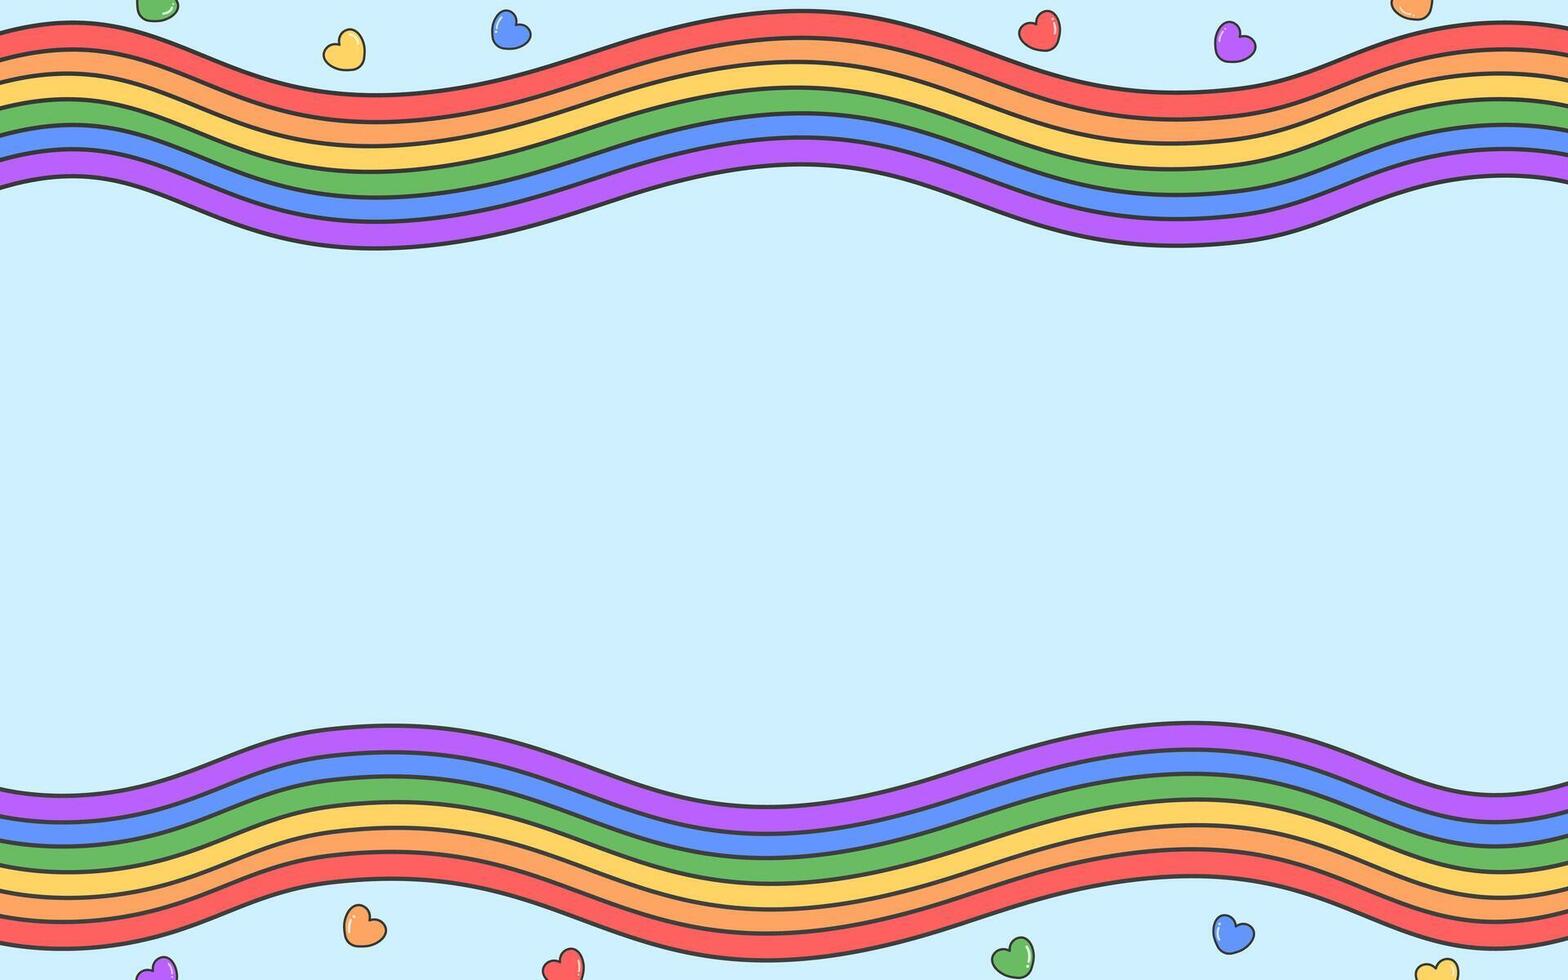 Rainbow colorful background with hearts for pride month concept, minimal, flat icon design vector